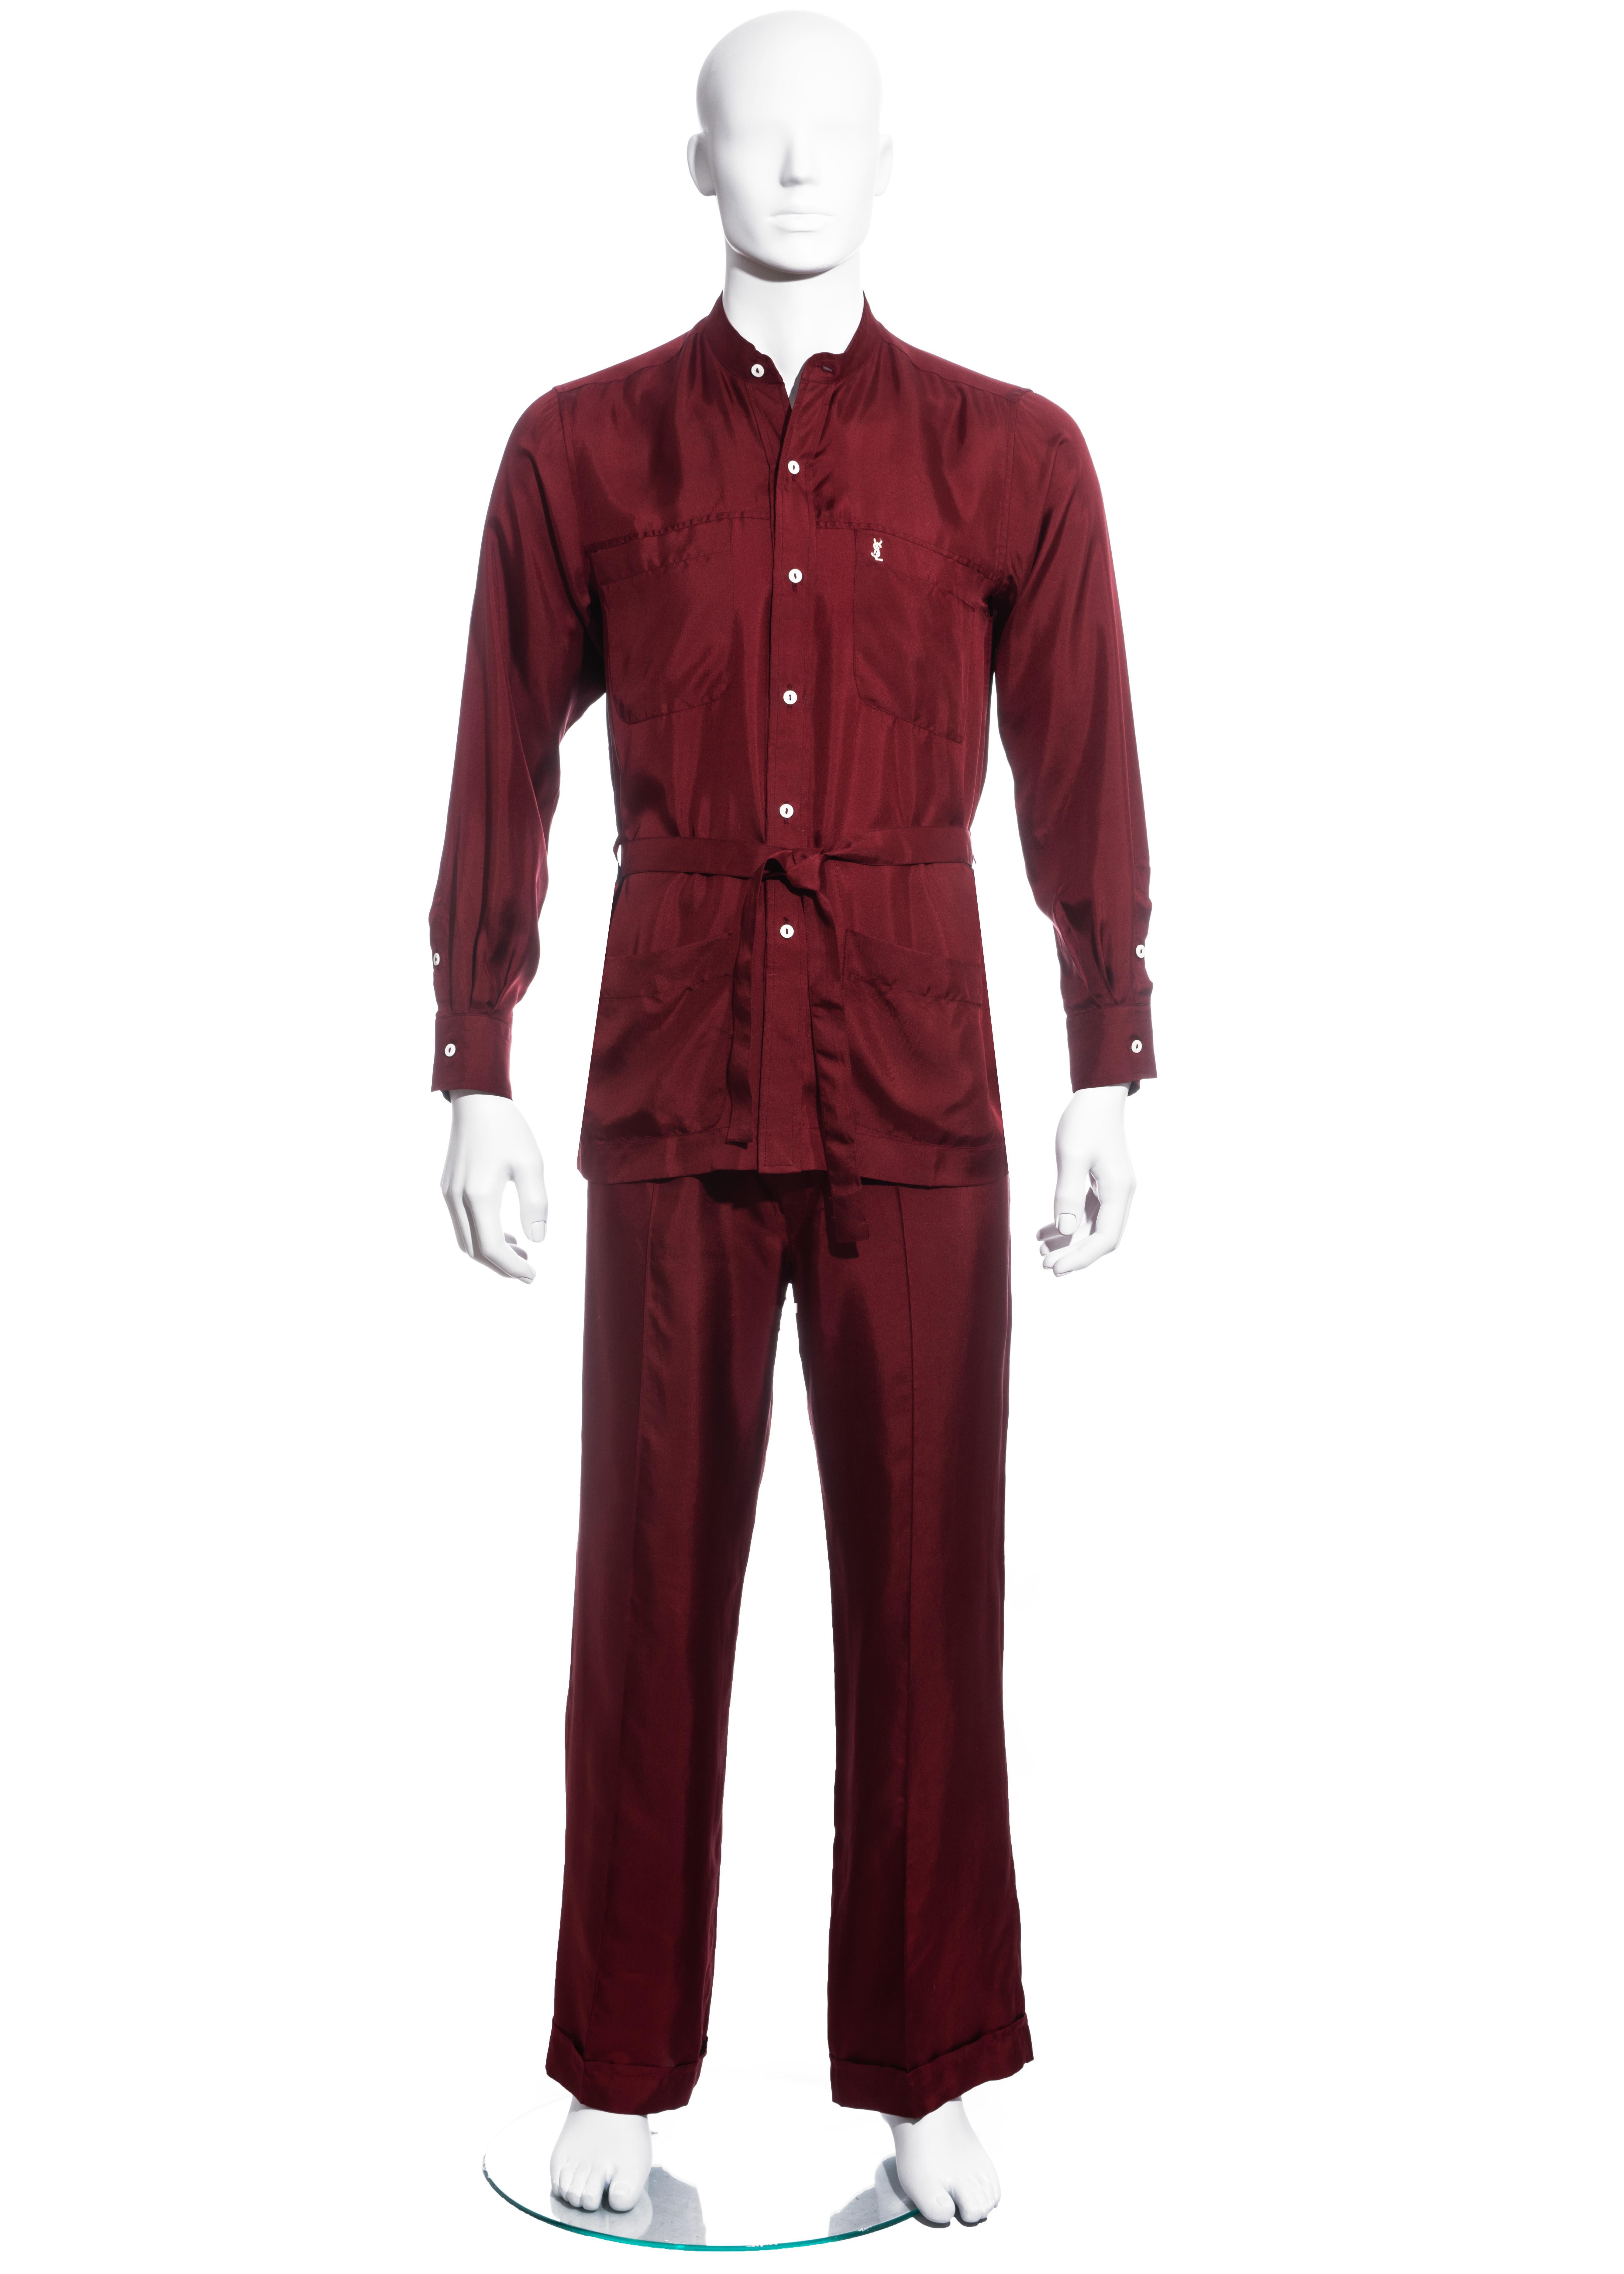 ▪ Men's Yves Saint Laurent red leisure suit
▪ 100% Silk 
▪ Mandarin collar
▪ Embroidered YSL logo on chest
▪ Tie-up waist belt 
▪ Cuffed drawstring pants 
▪ Size Small
▪ Spring-Summer 1978